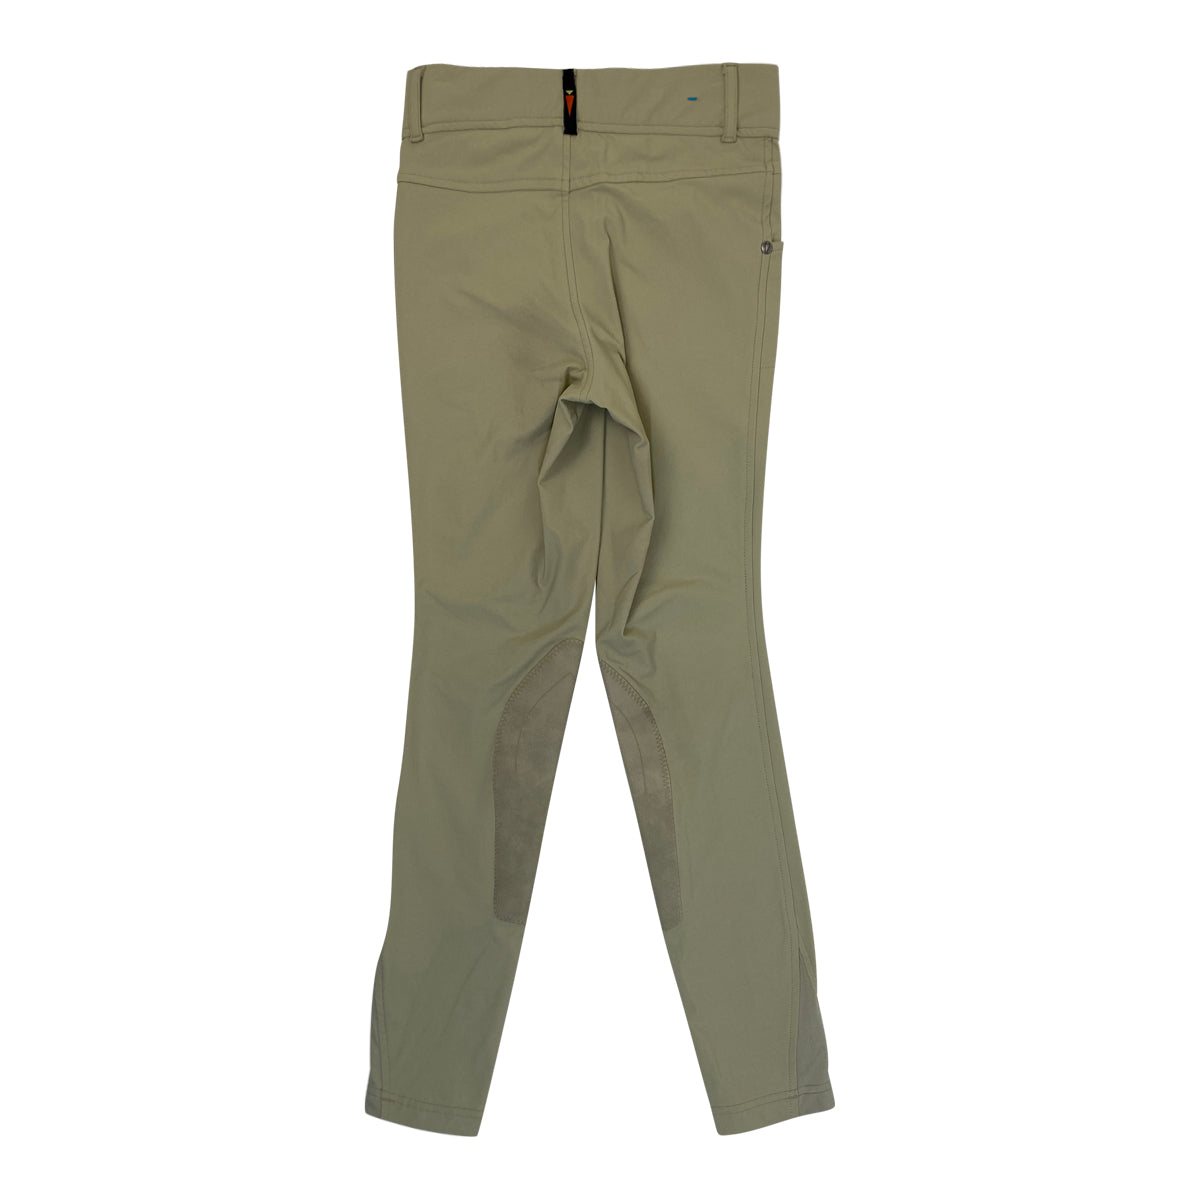 Kerrits 'Crossover II' Knee Patch Breeches in Sand